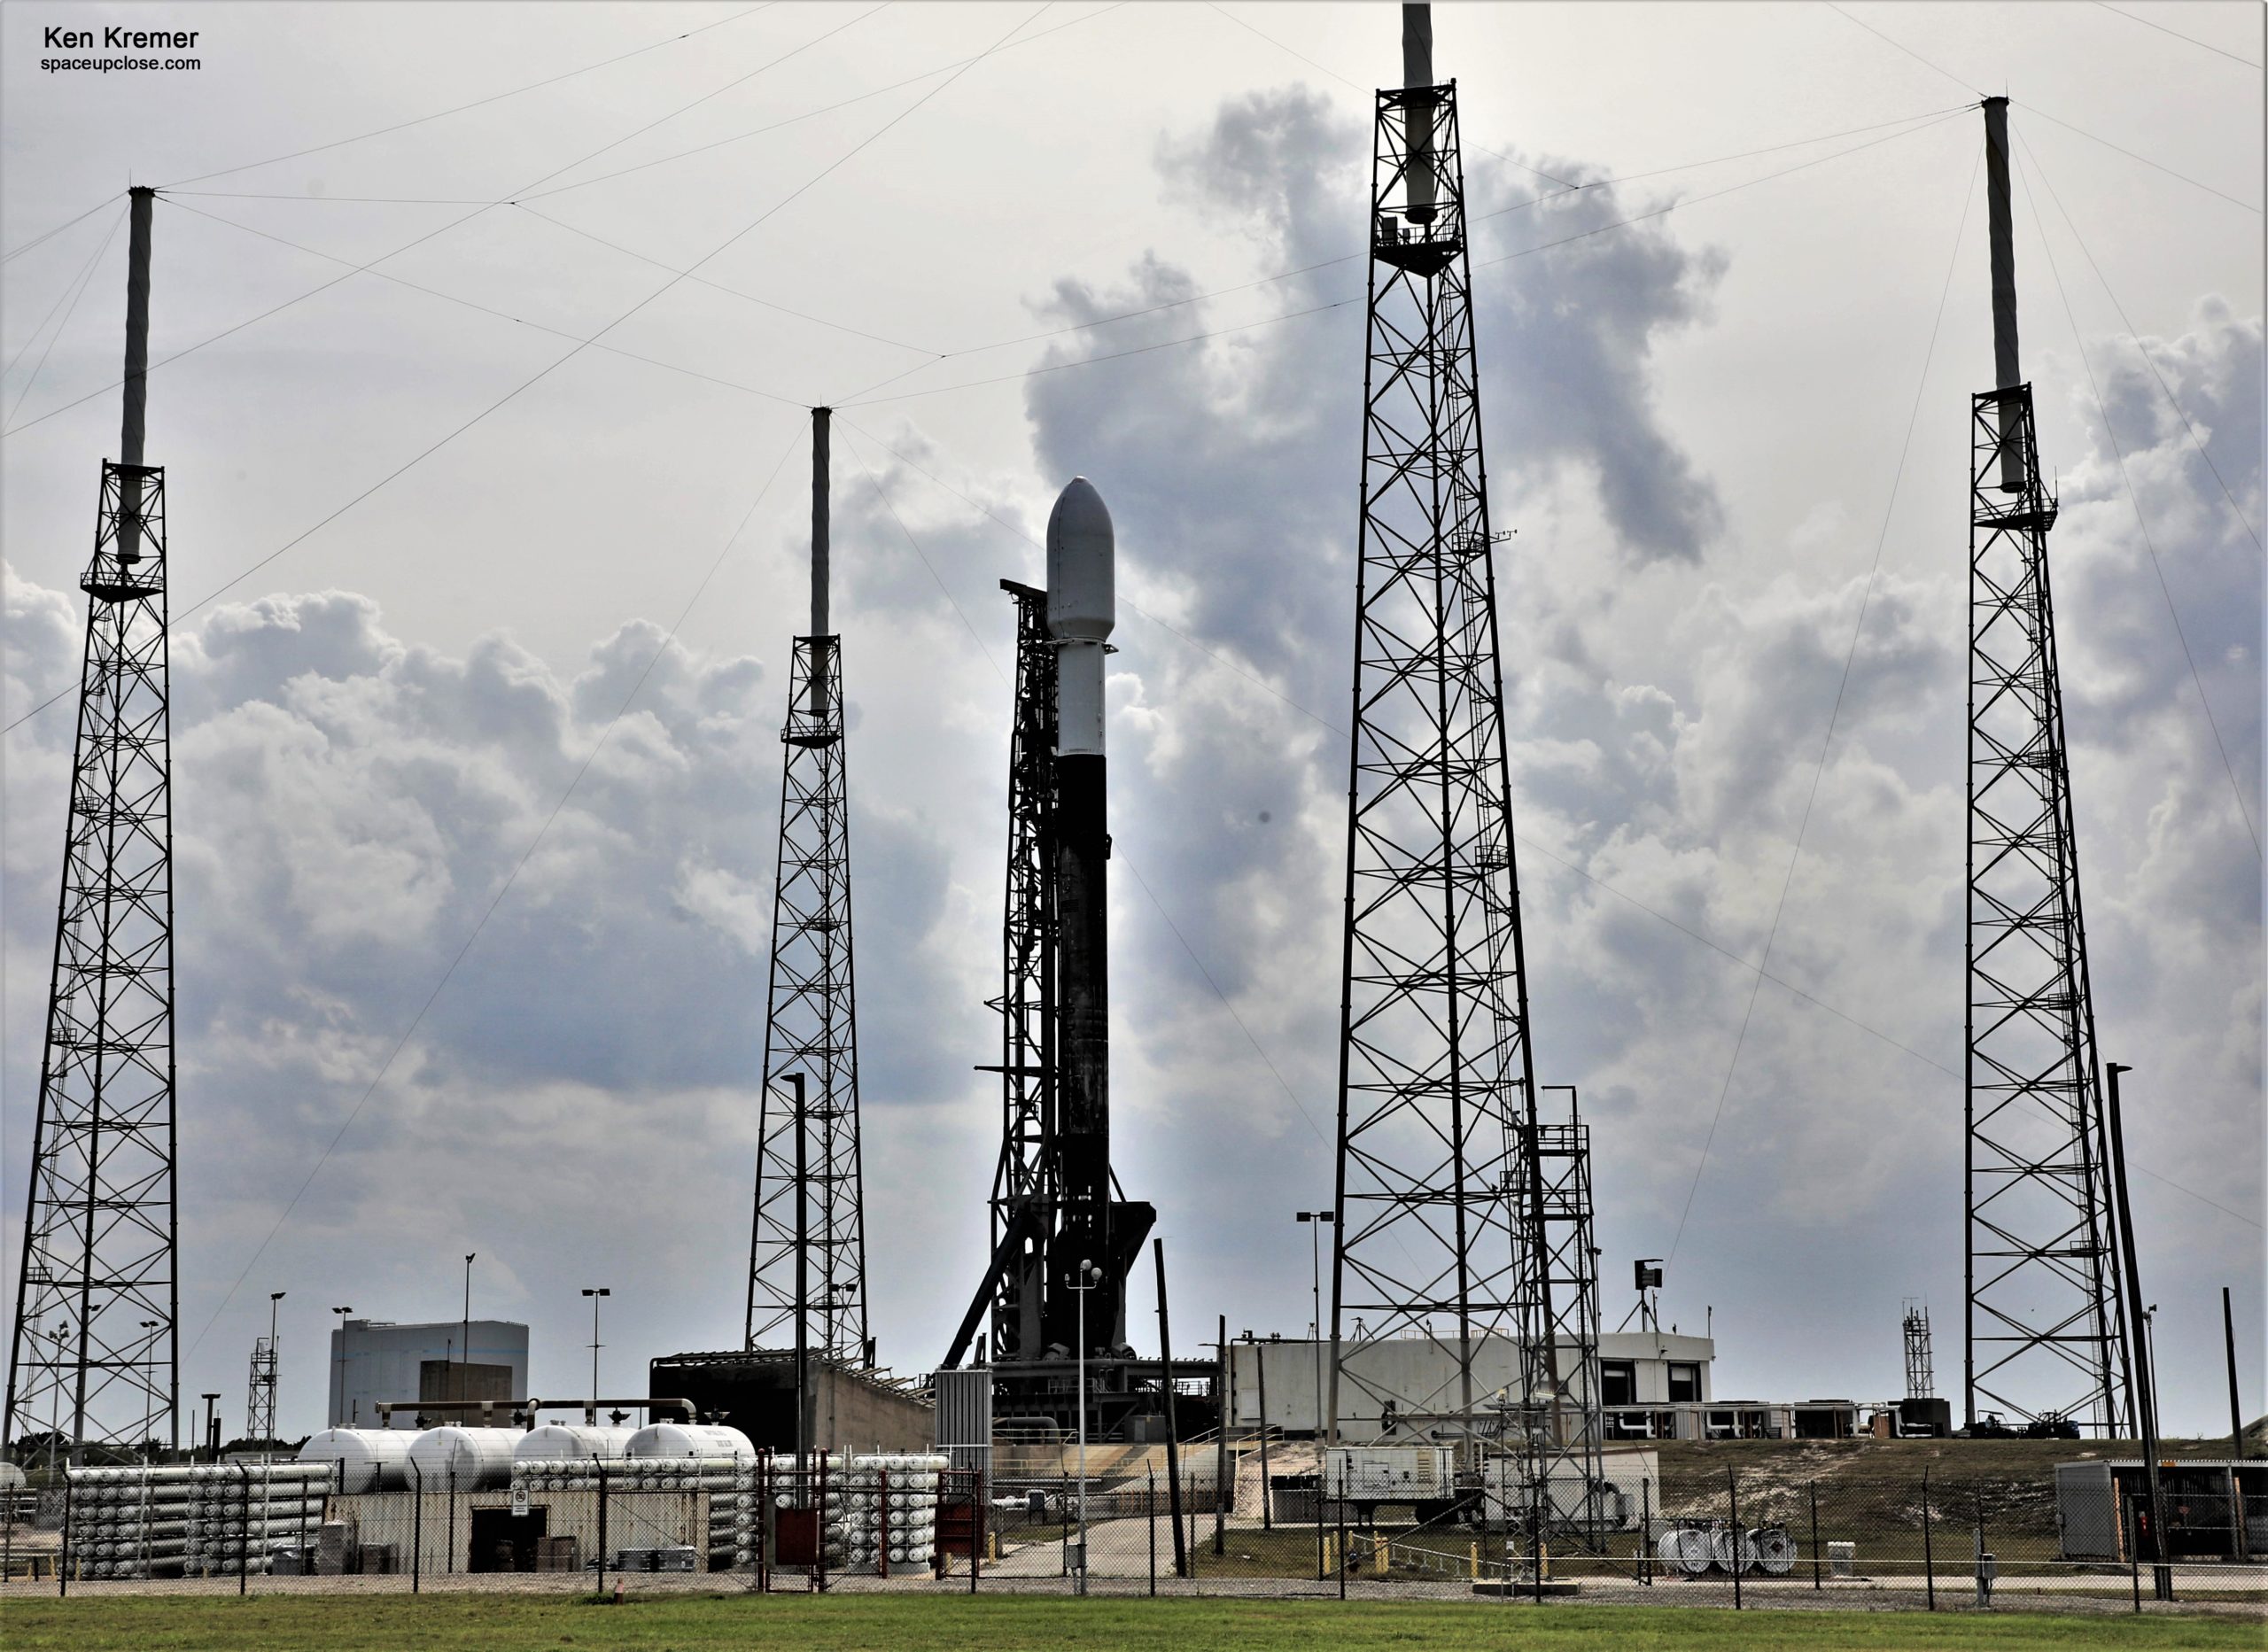 Severe Weather Threatens April 1 SpaceX Falcon 9 Launch of Transporter 4 Rideshare Mission SmallSats: Photos